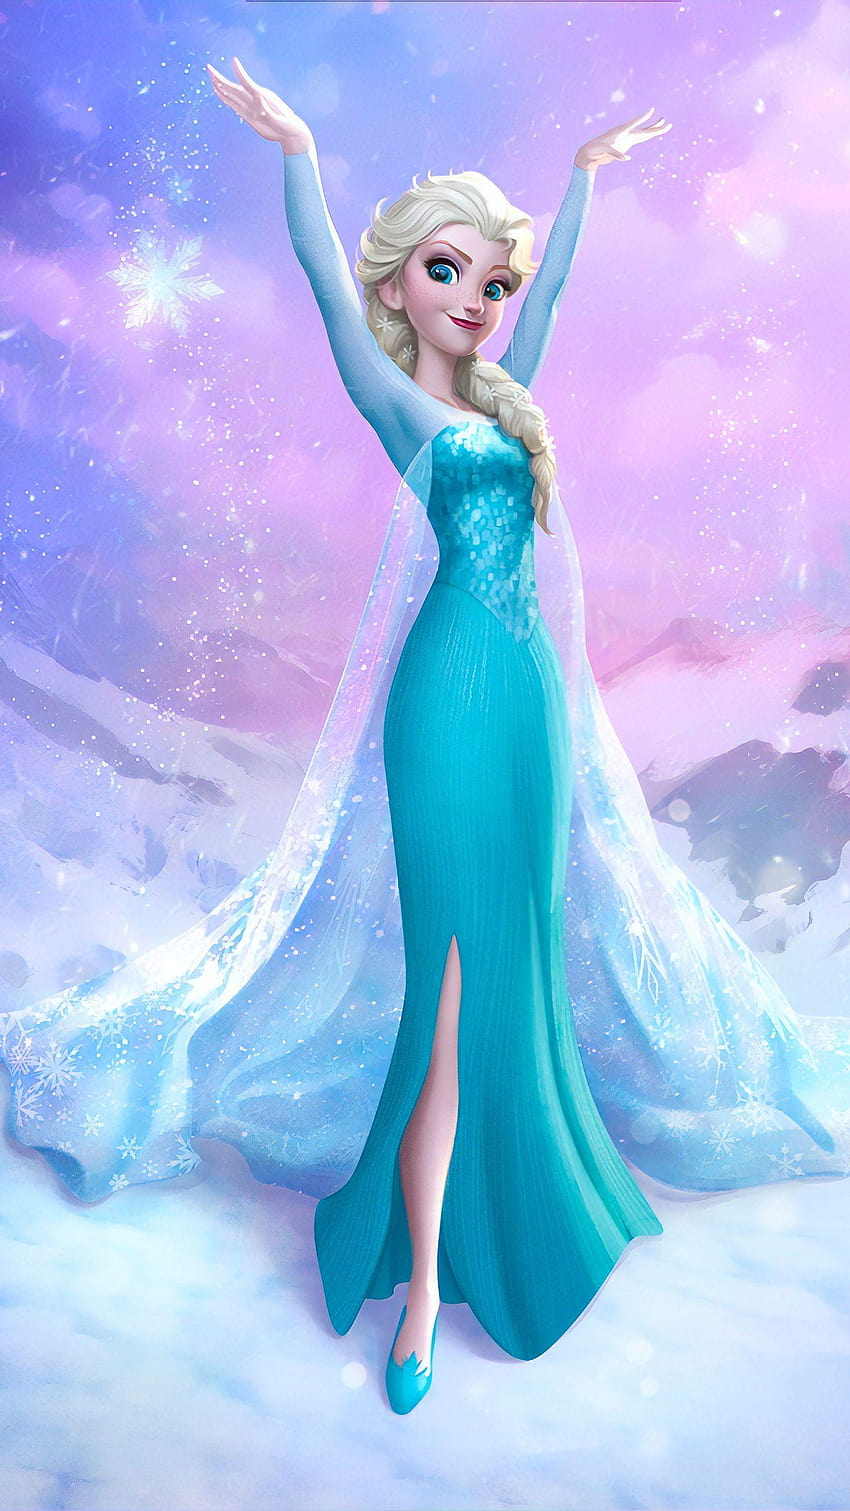 FROZEN 2 TRAILER IS OUT & THE PAST IS NOT WHAT IT SEEMS, frozen 2 iphone HD phone wallpaper